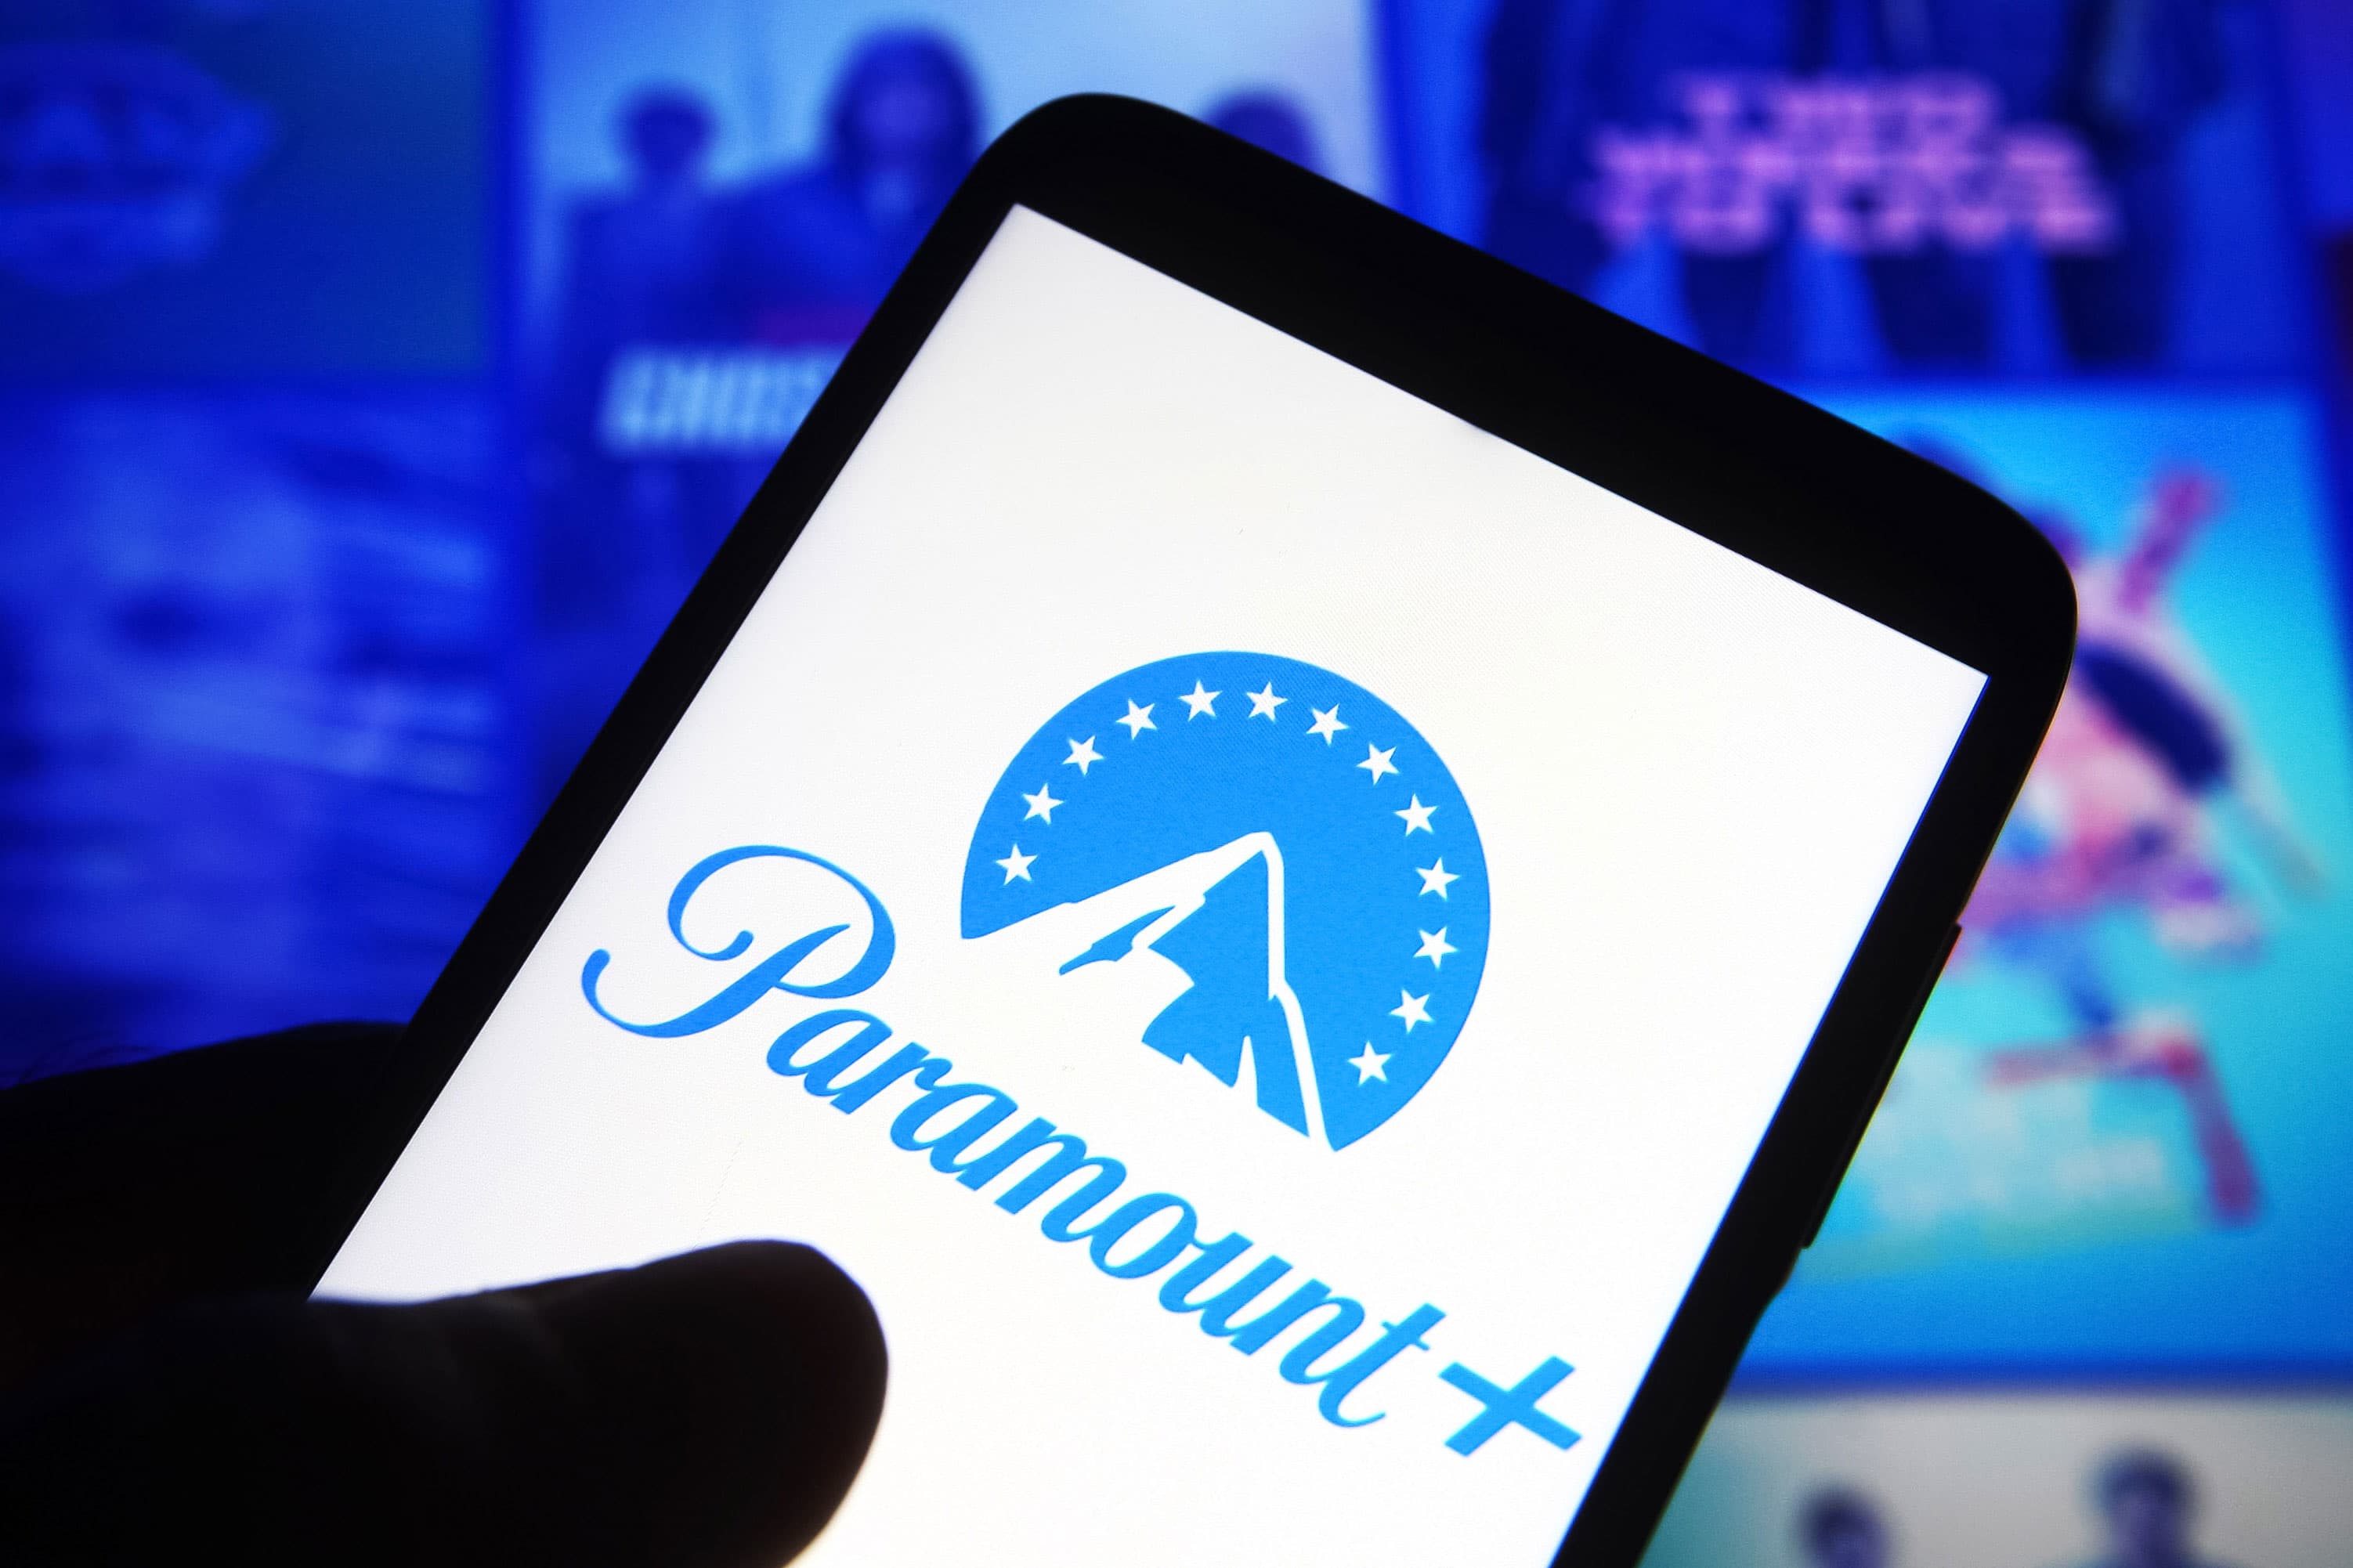 Paramount's peak earnings growth is likely in the past, Wells Fargo says in downgrade